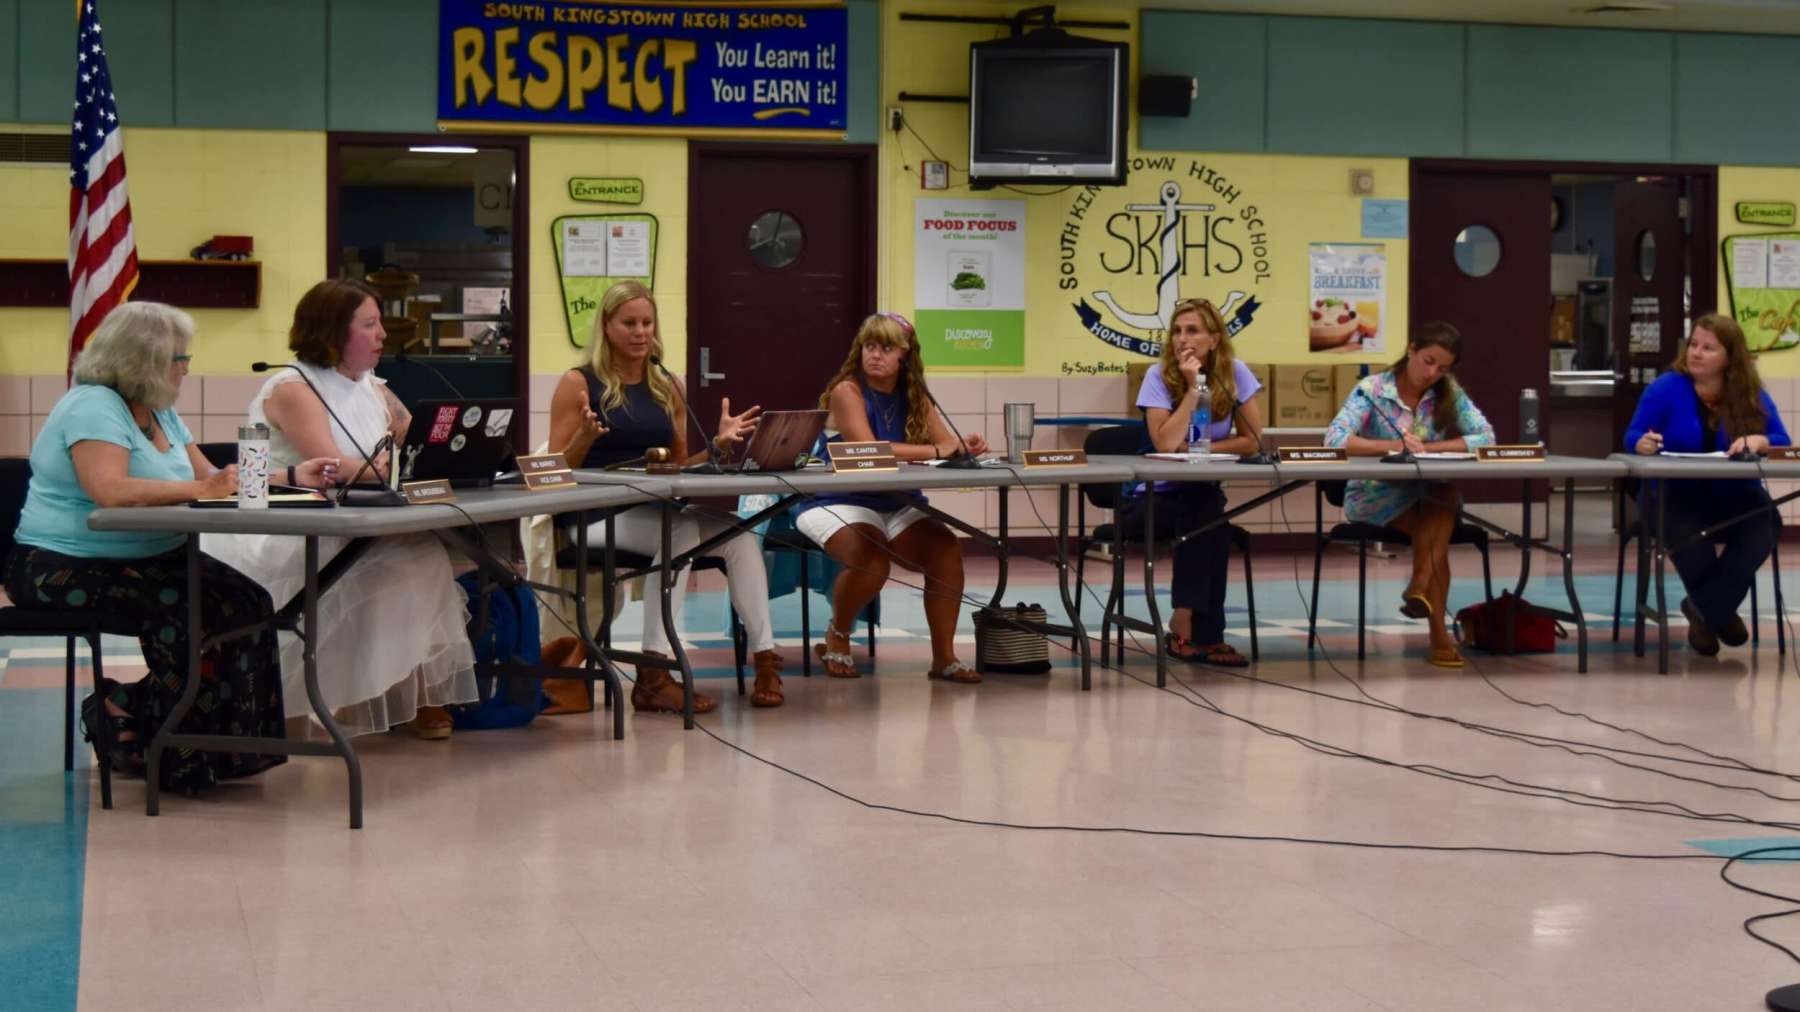 Rhode Island News: South Kingstown School Committee passes resolution in support of immigrant, refugee and undocumented students and families